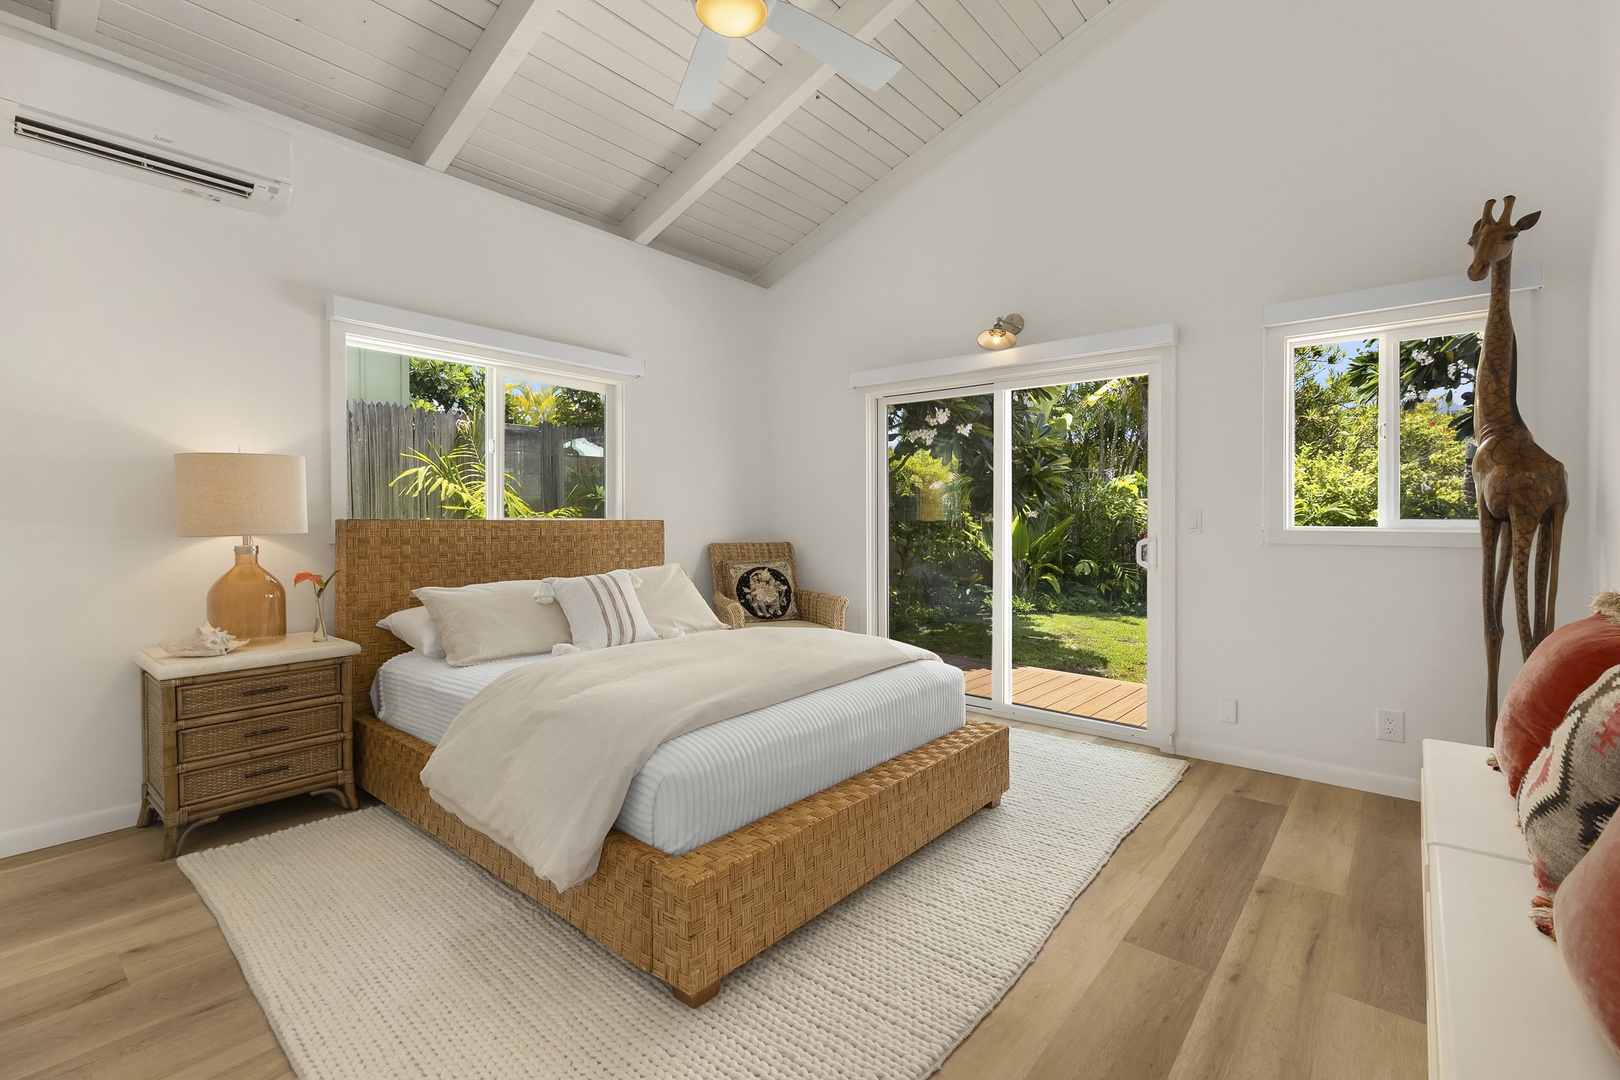 Kailua Vacation Rentals, Ranch Beach House - Primary bedroom with private access  to main lanai and garden area, Split A/C, and access too Outdoor Shower.